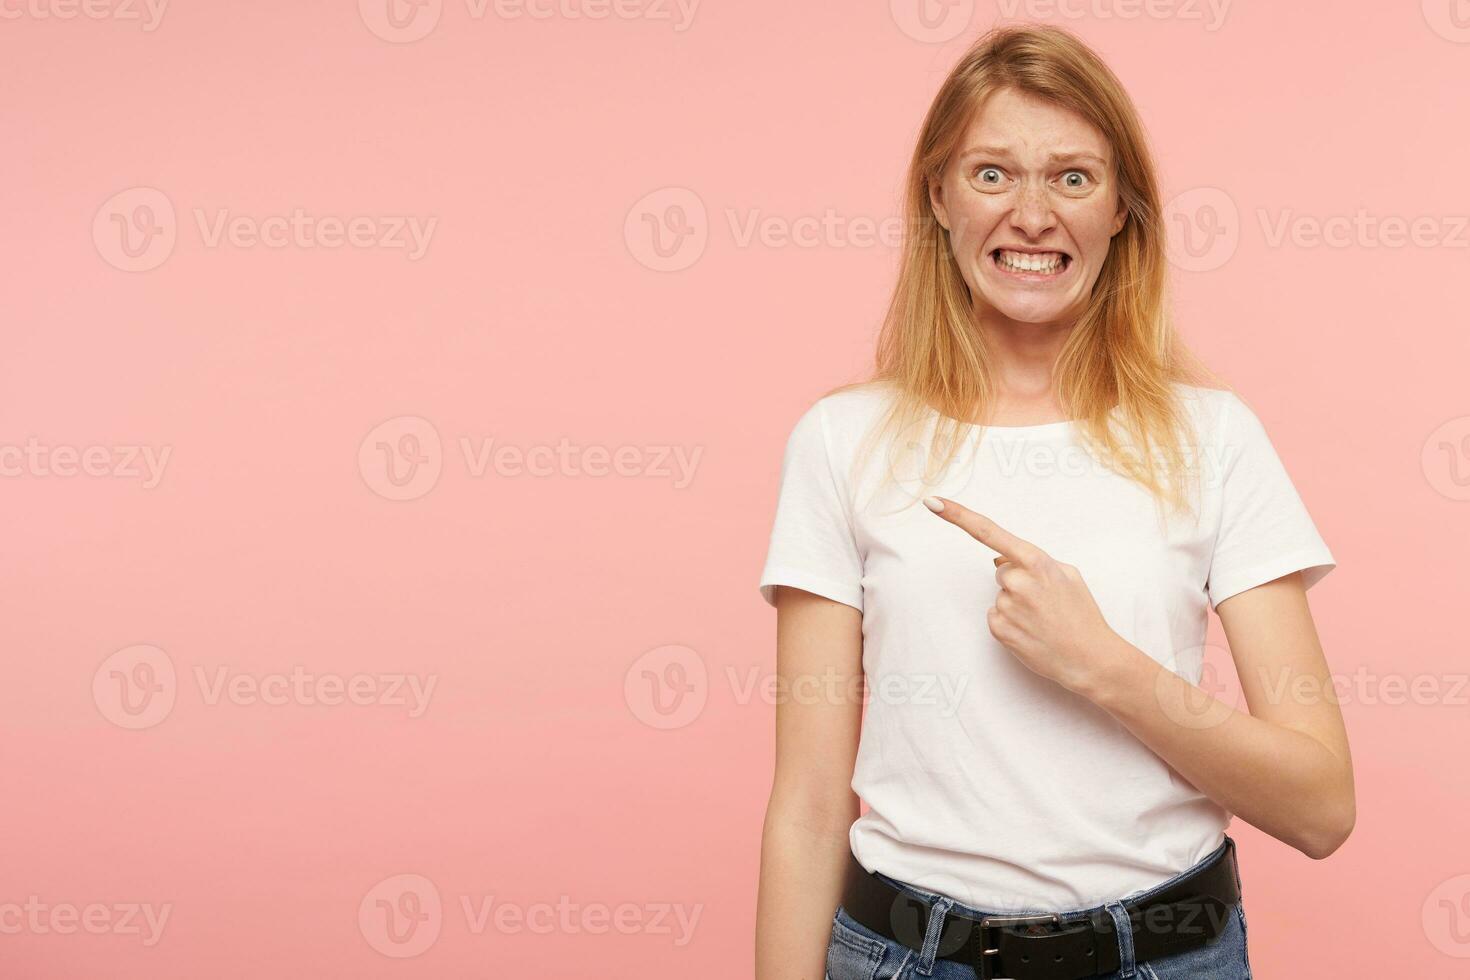 Confused young green-eyed foxy lady with casual hairstyle grimacing her face while pointing aside with raised forefinger, isolated against pink background photo